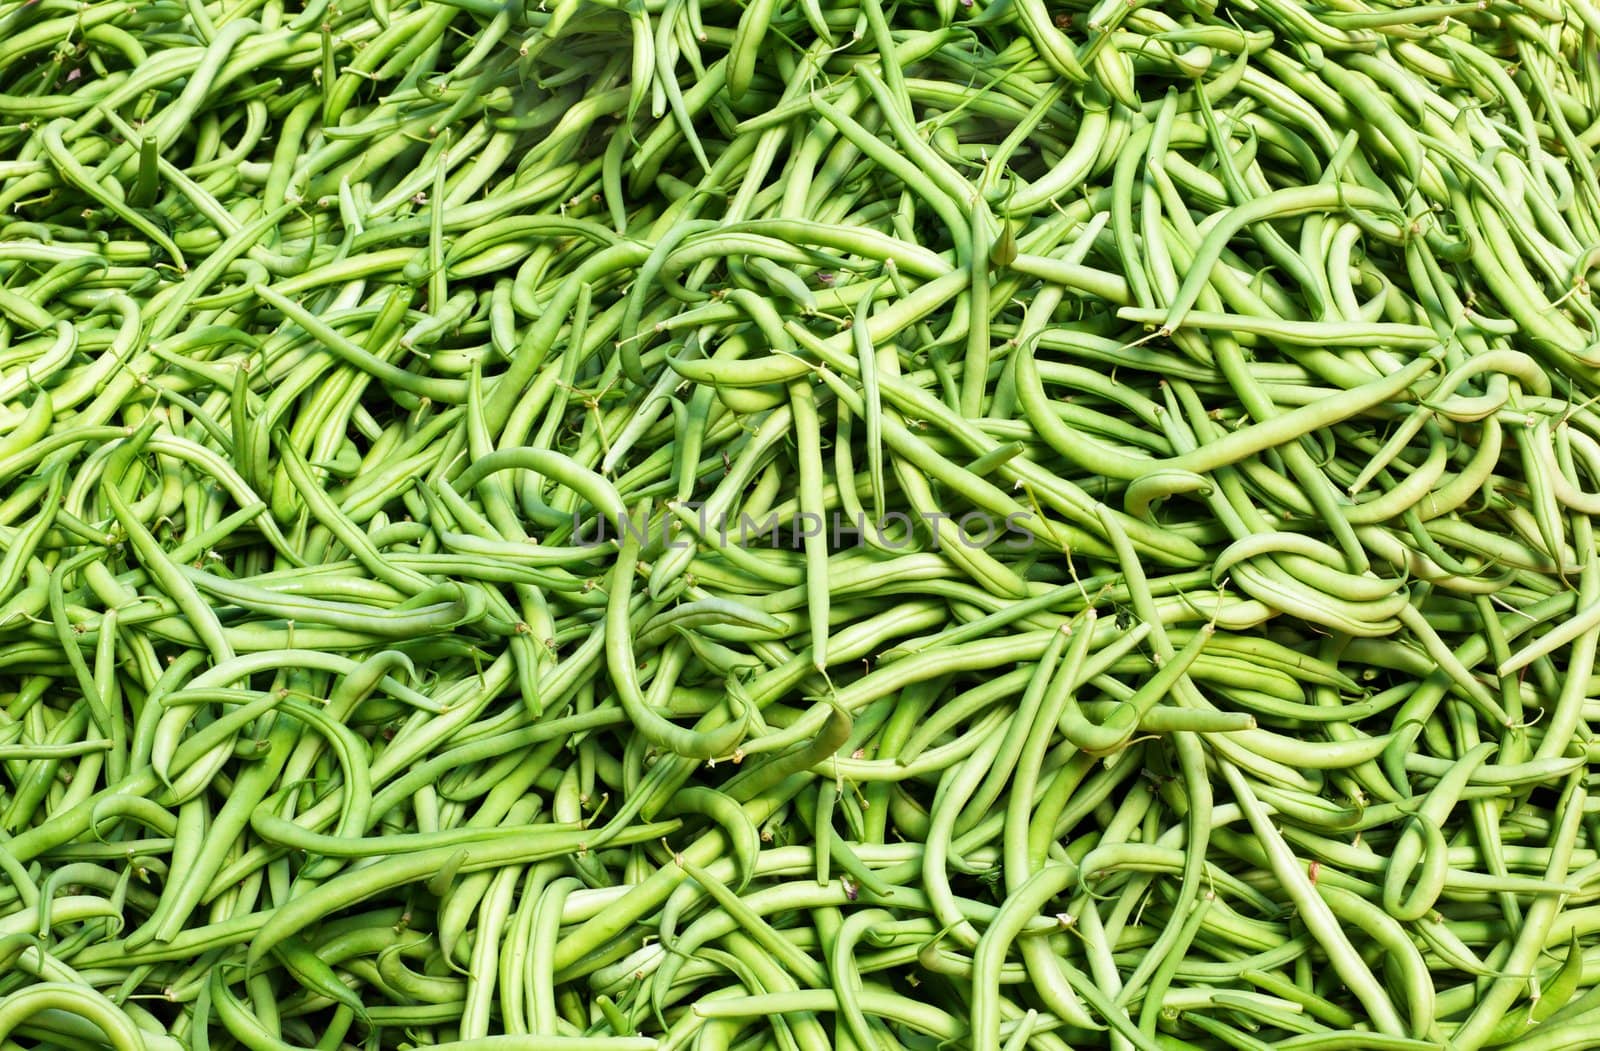 Big pile of Green string Beans at the farmers market